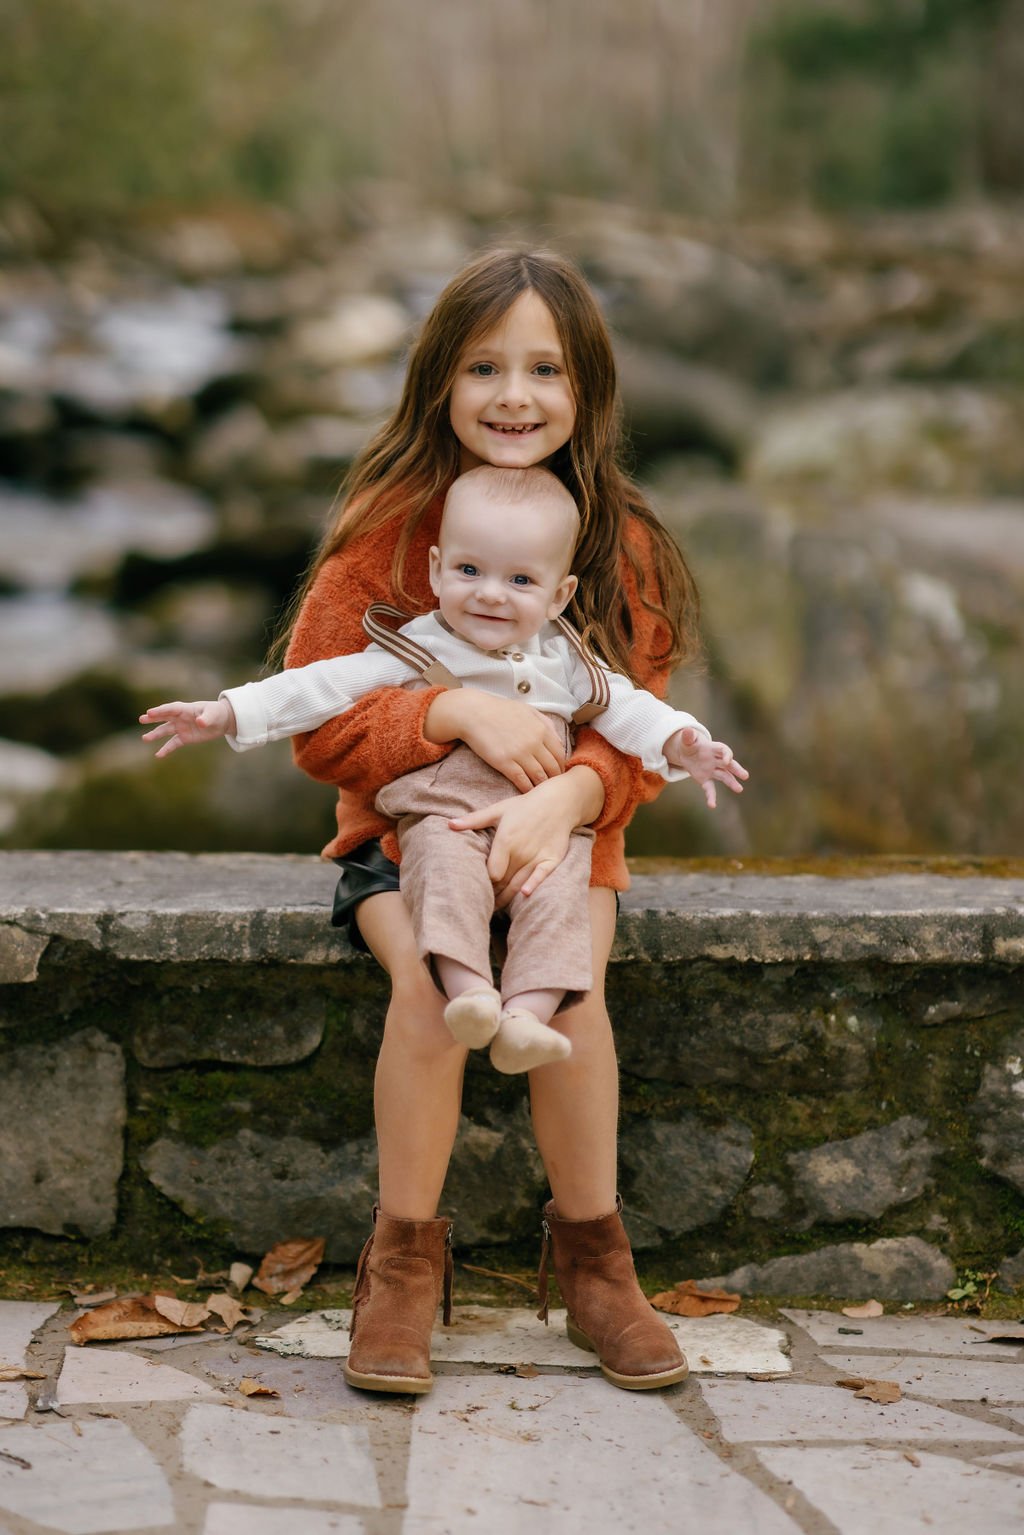 gatlinburg-family-photographer-things-to-do-with-family-in-gatlinburg-daughter-holding-baby